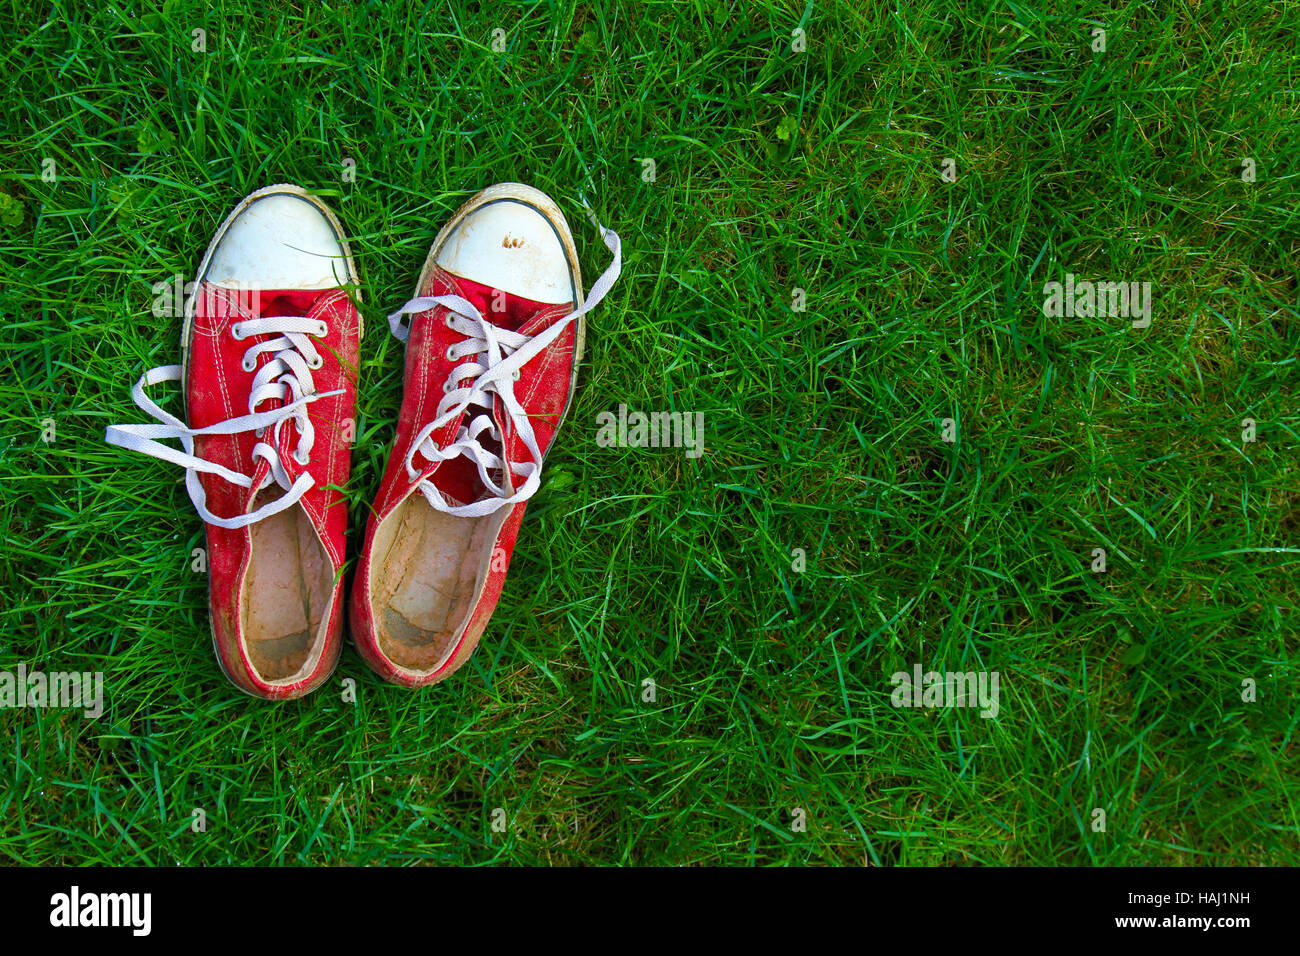 sport shoes on grass background Stock Photo